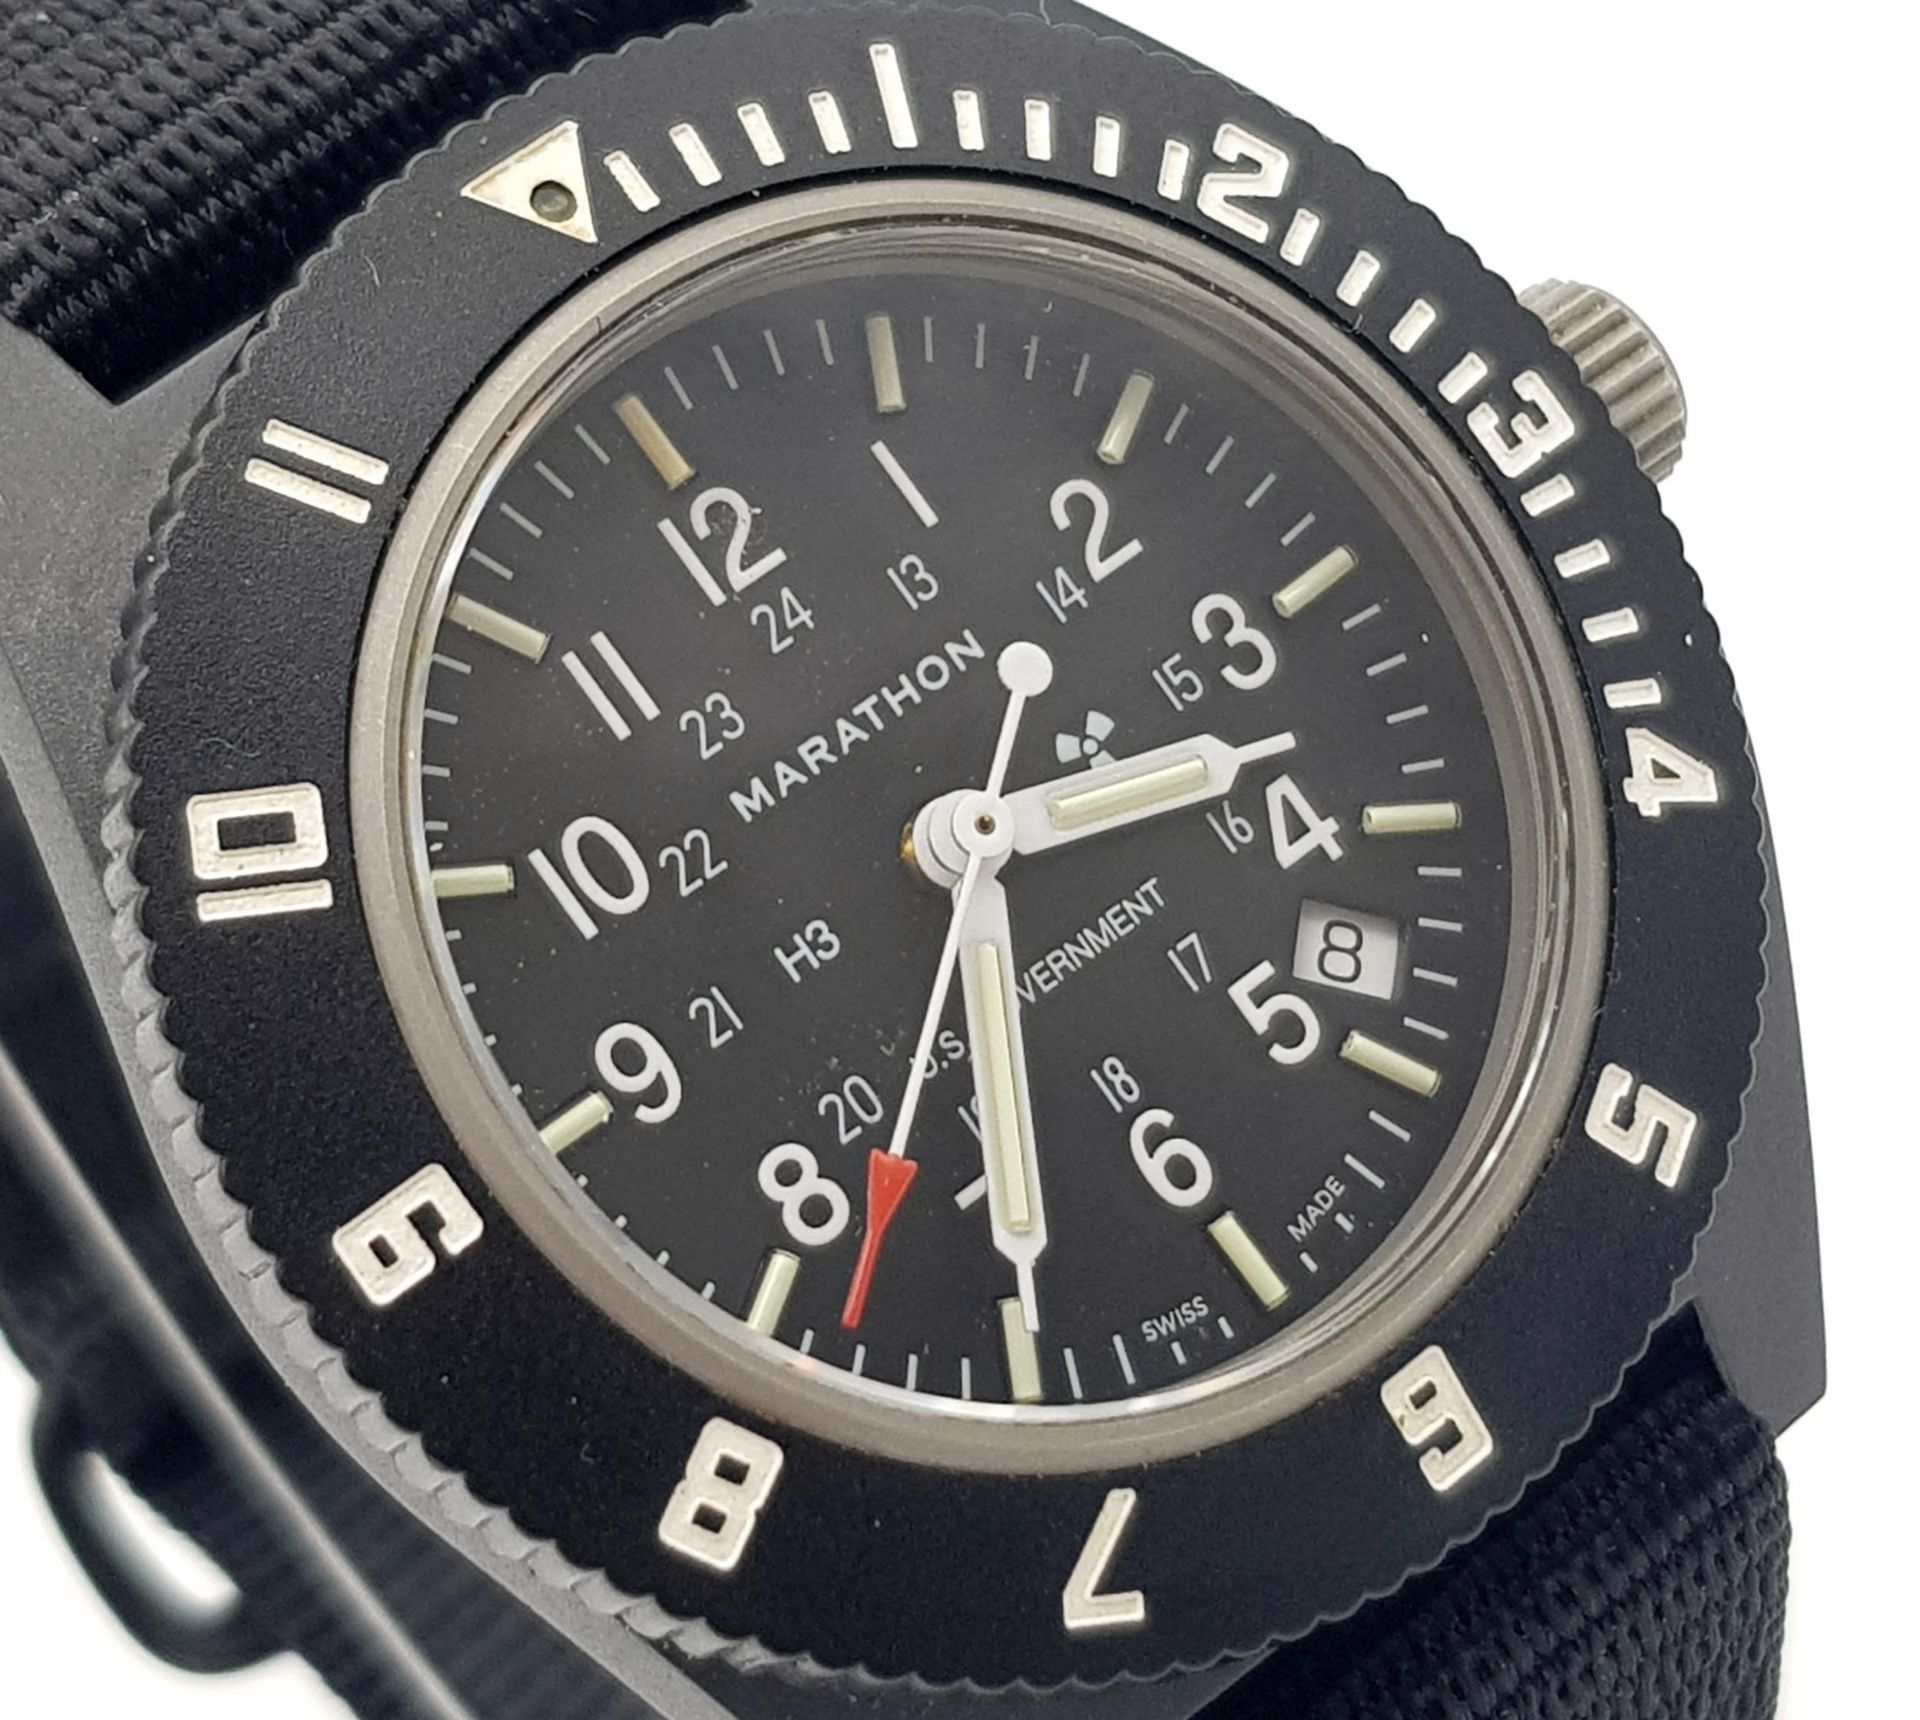 An Unworn, Full Military Specification, US Government Quartz Pilots/Navigator Date Watch by - Image 3 of 6